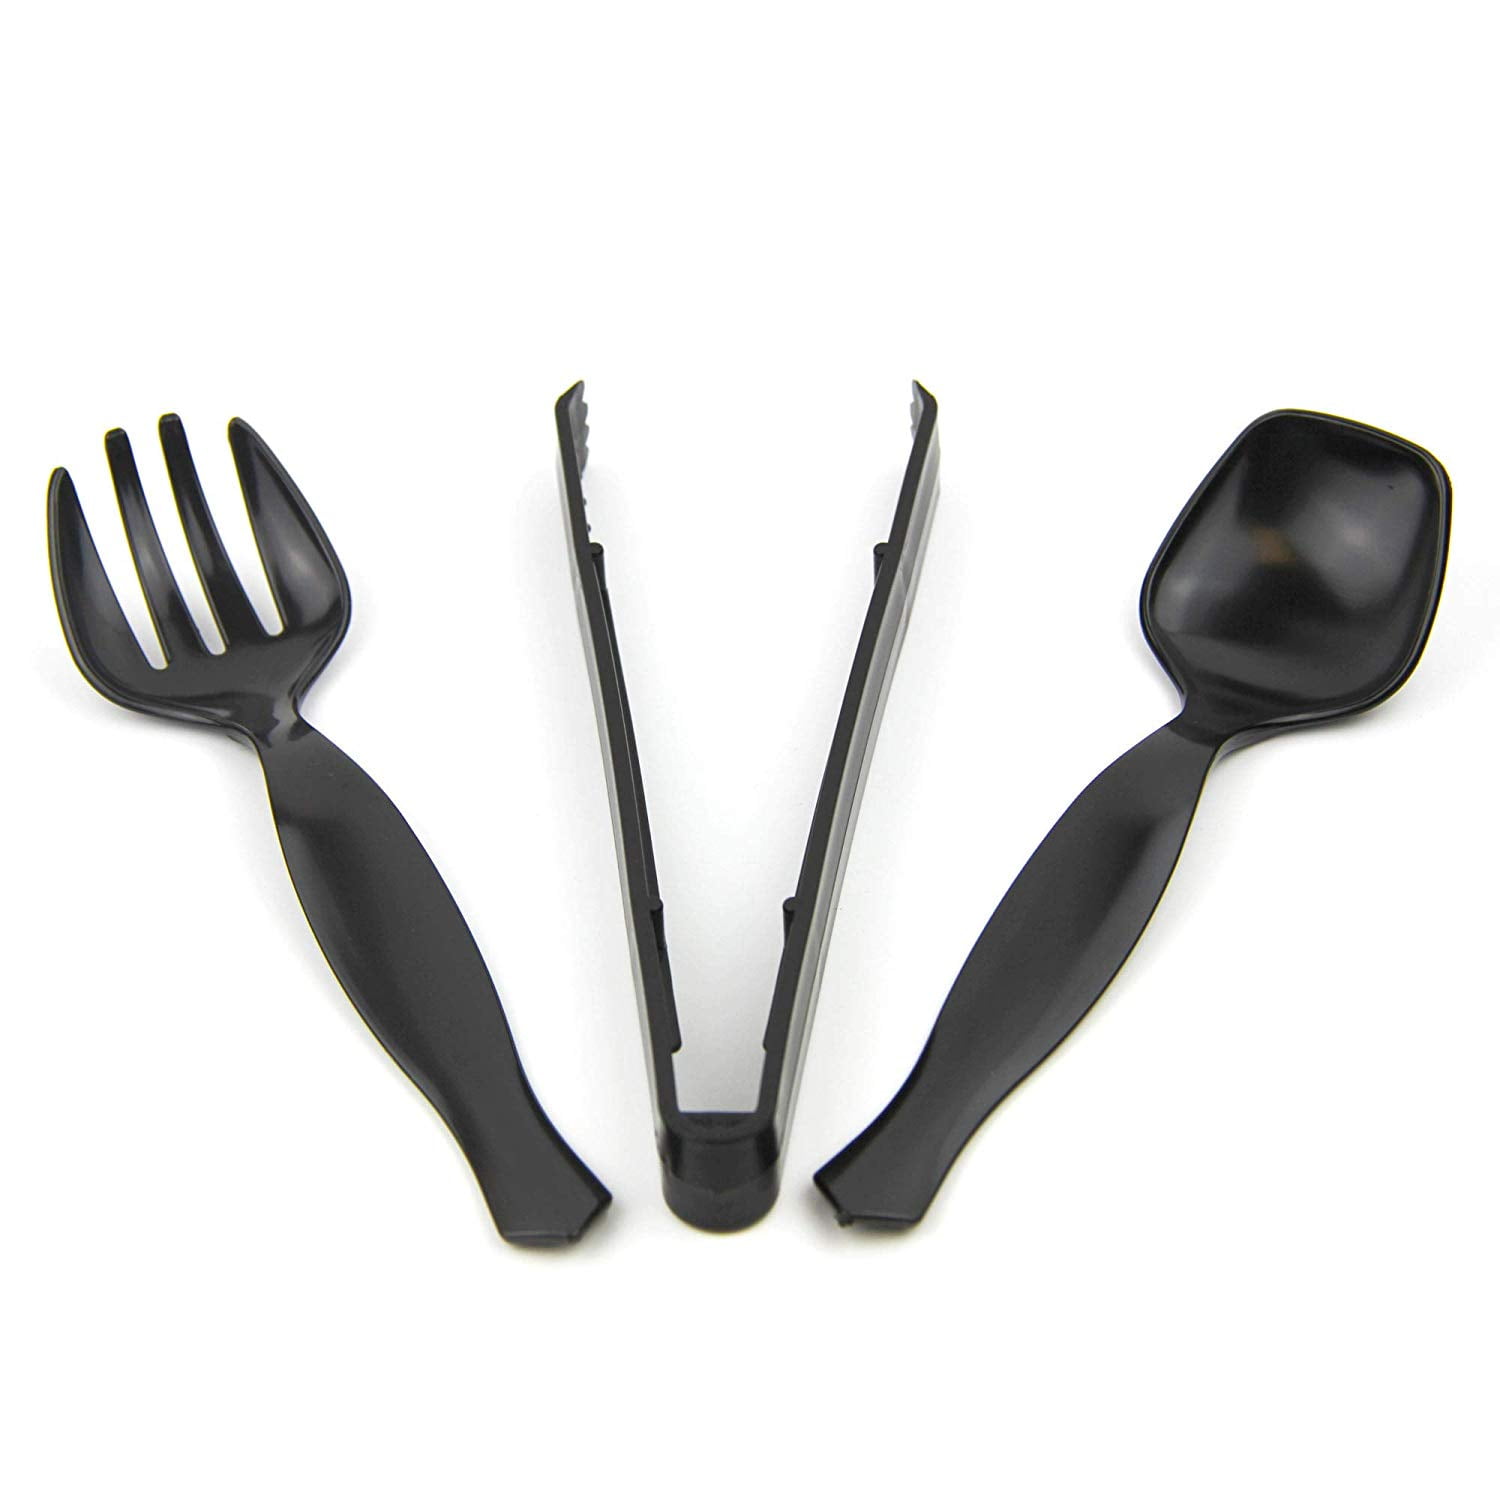 10 Big Heavy Weight Reusable Cooking Plasticware for Party Buffet Catering Hard Silverware for Salads Sauses 18 Pack Large Black Mixing Heavy Duty Disposable Plastic Serving Spoons Utensils Set 